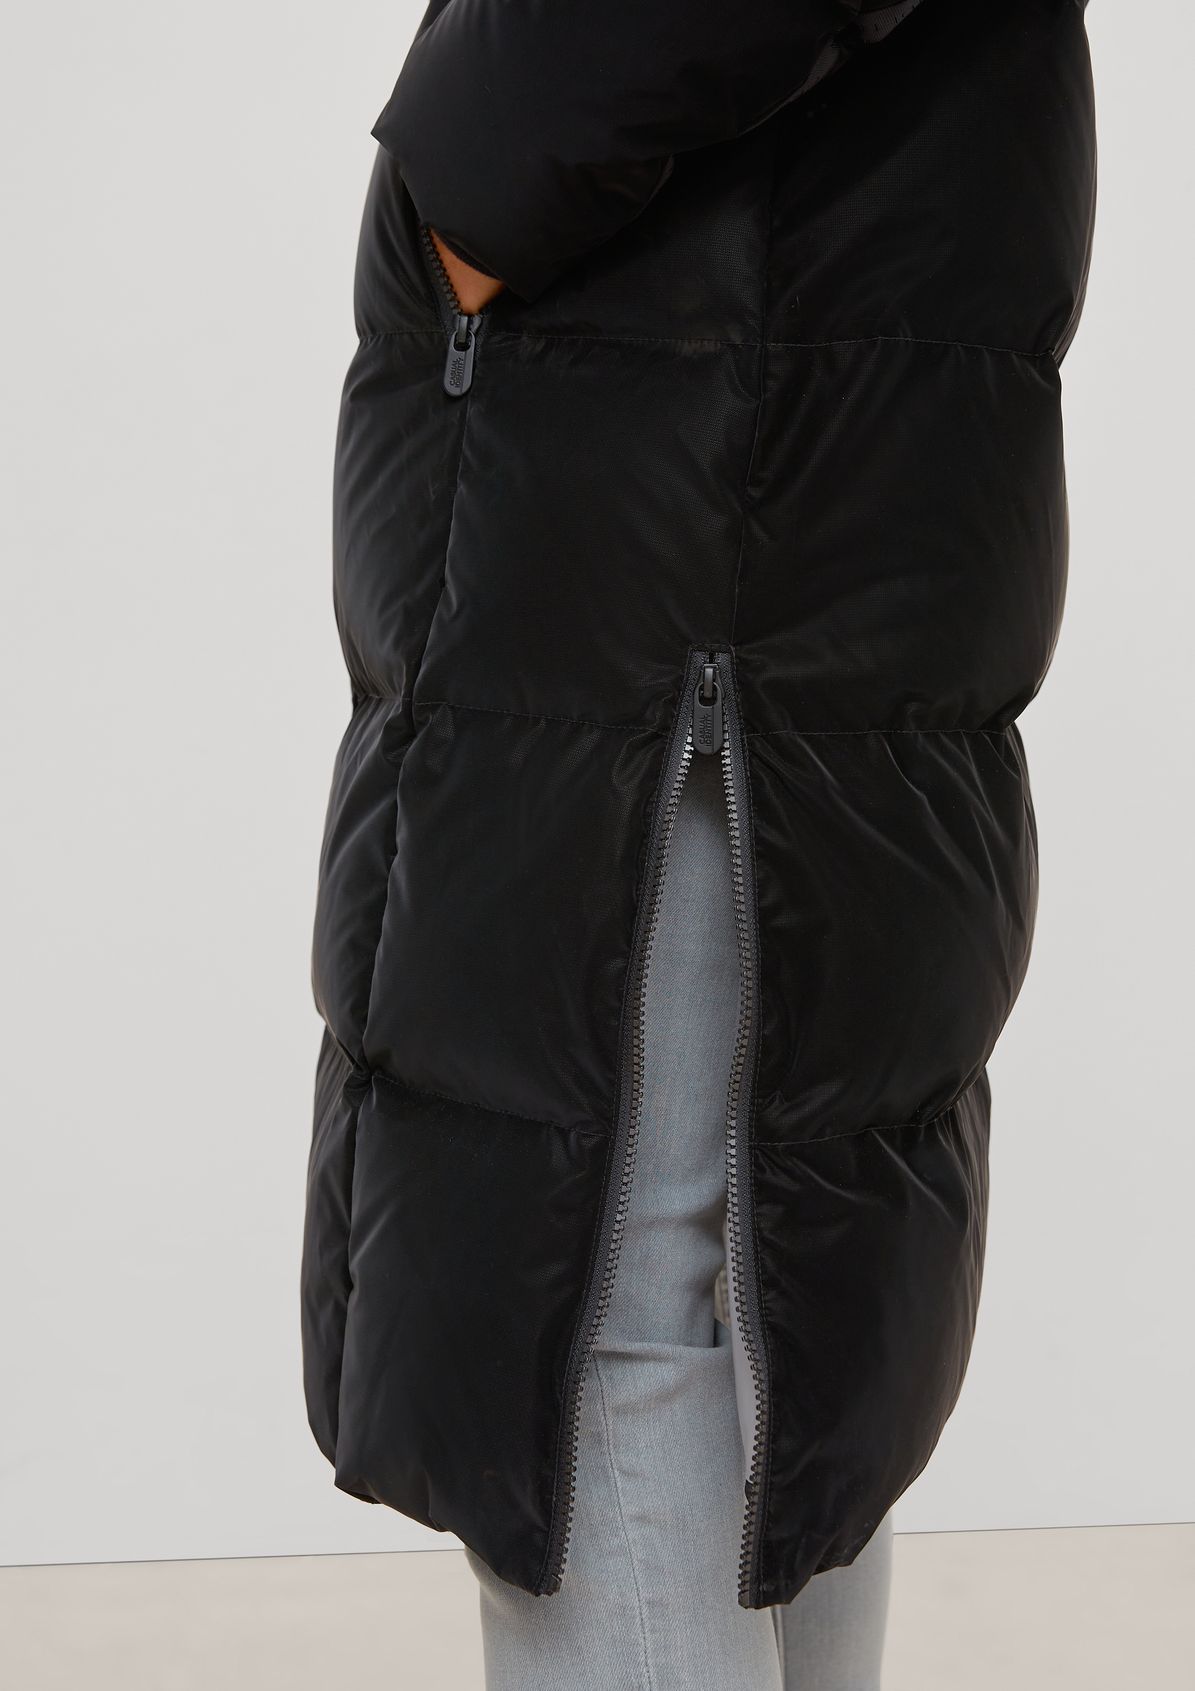 Down coat in a coated look from comma